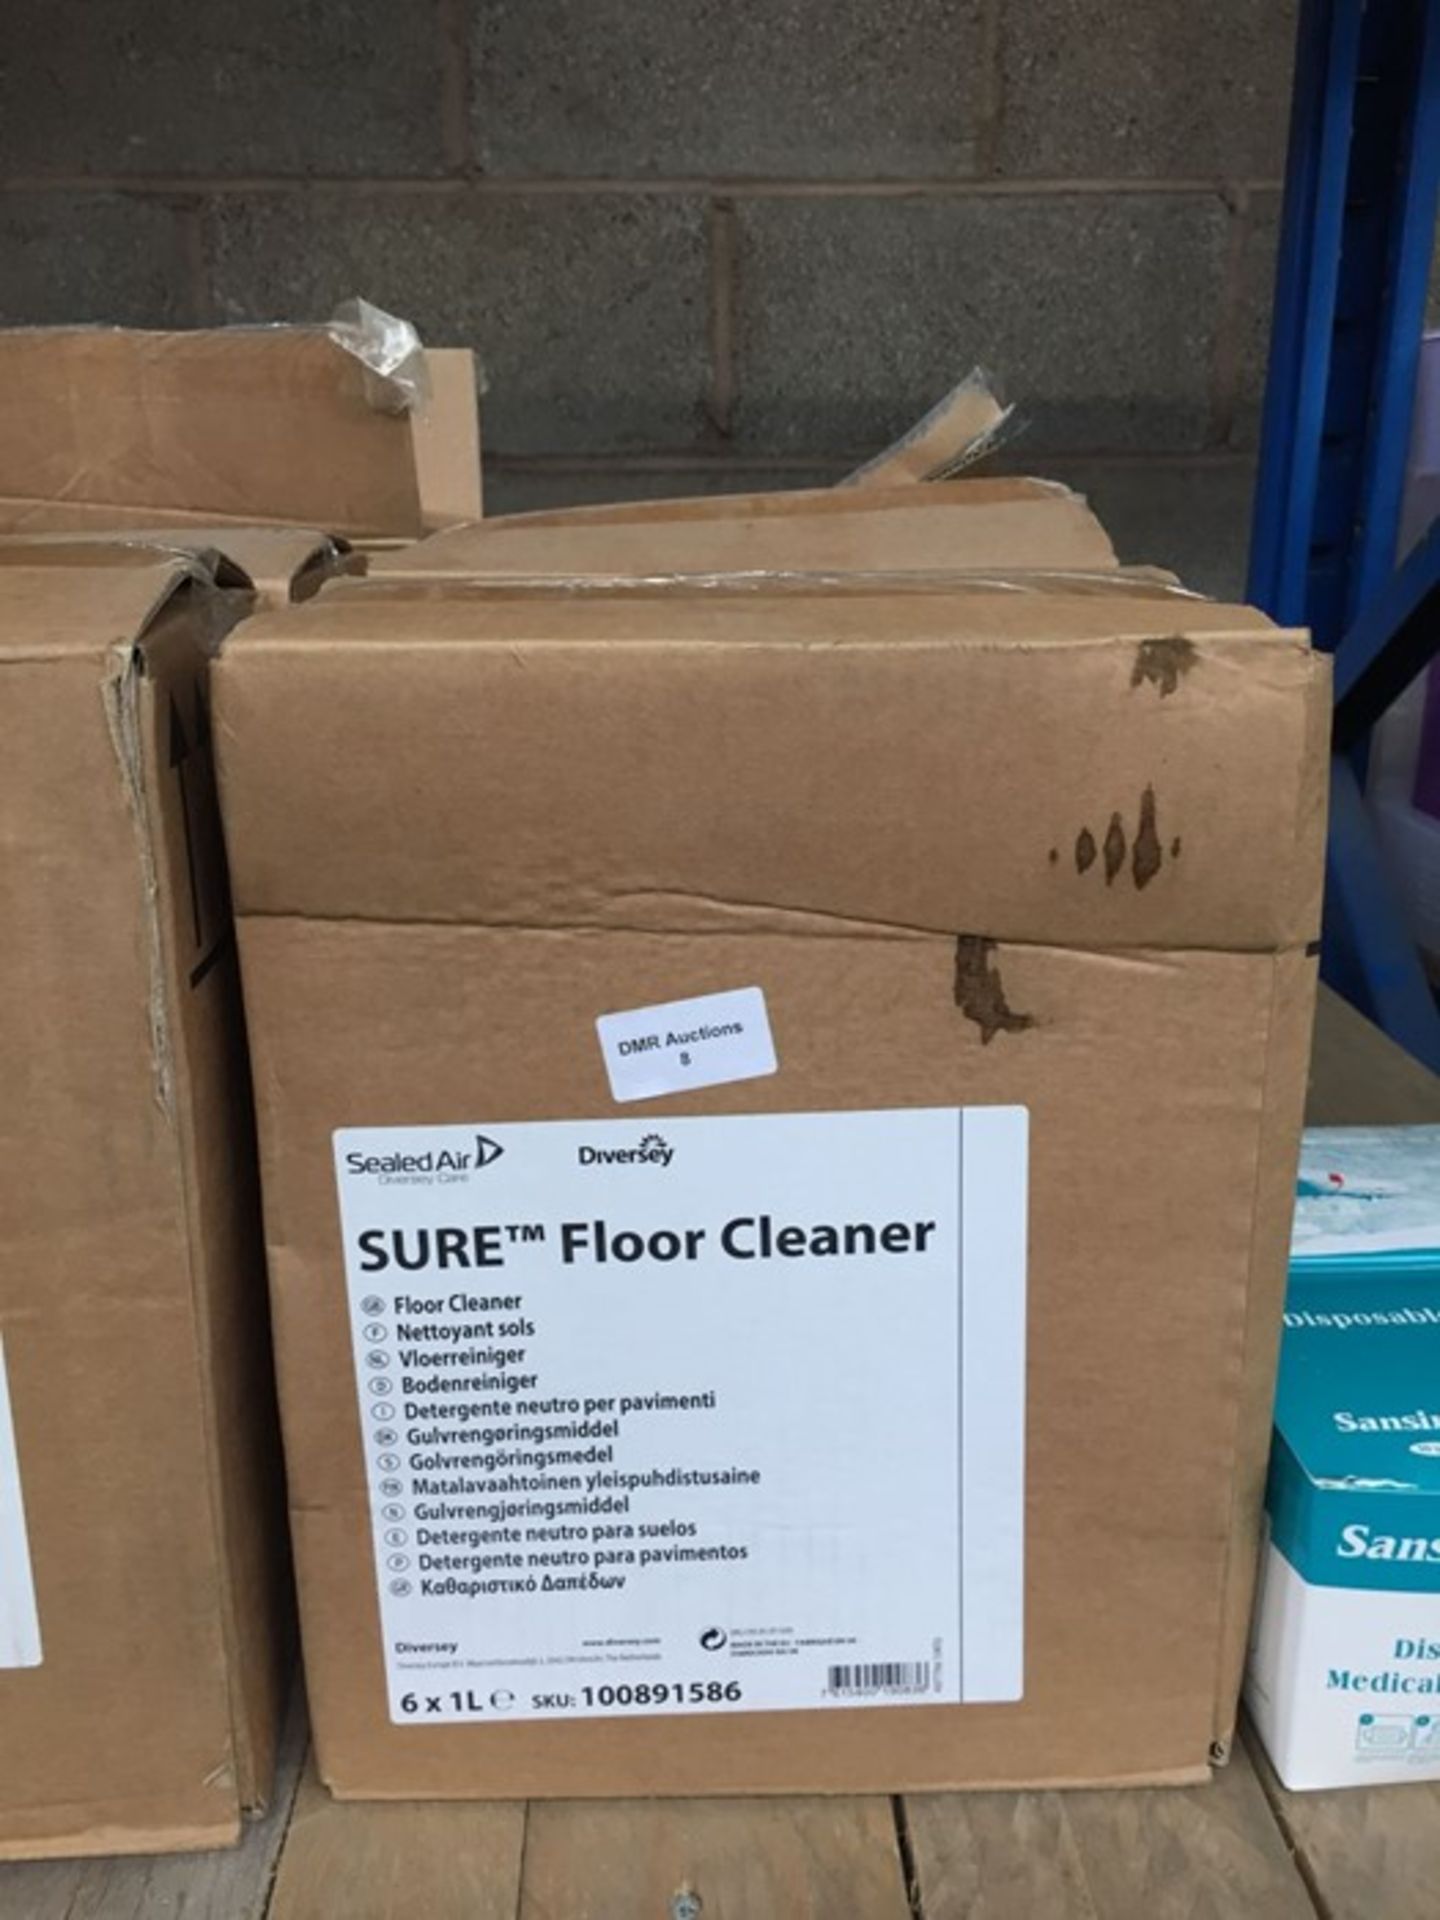 1 LOT TO CONTAIN 3 BOXES OF SURE FLOOR CLEANER - 6 X 1L BOTTLES PER BOX - Image 2 of 2